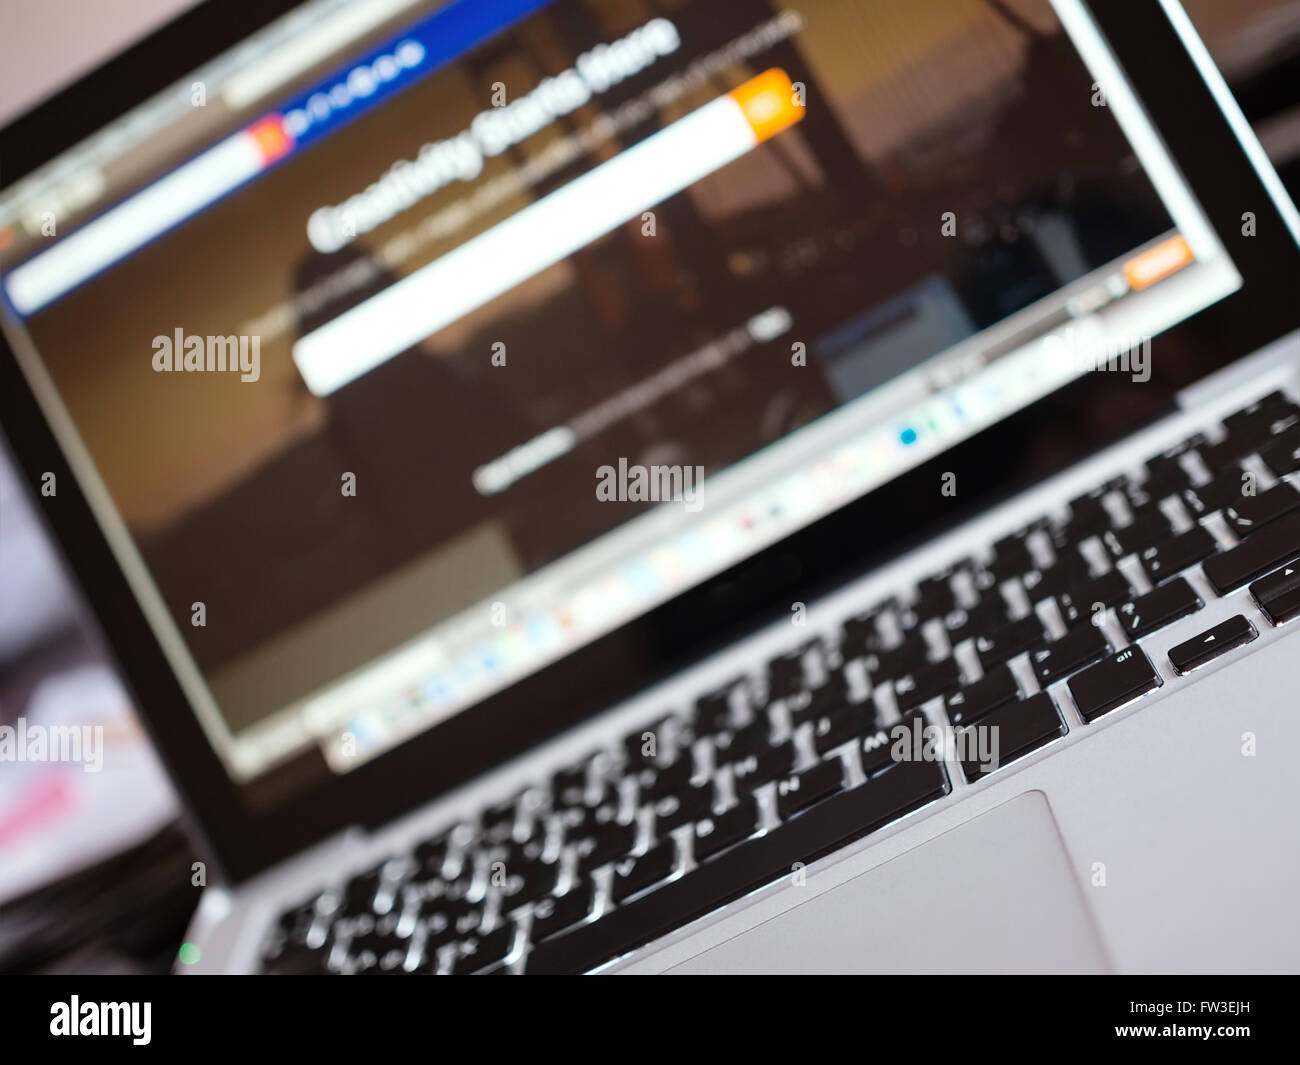 Laptop and blurred website interface on the screen, tilt view, shallow depth of field Stock Photo